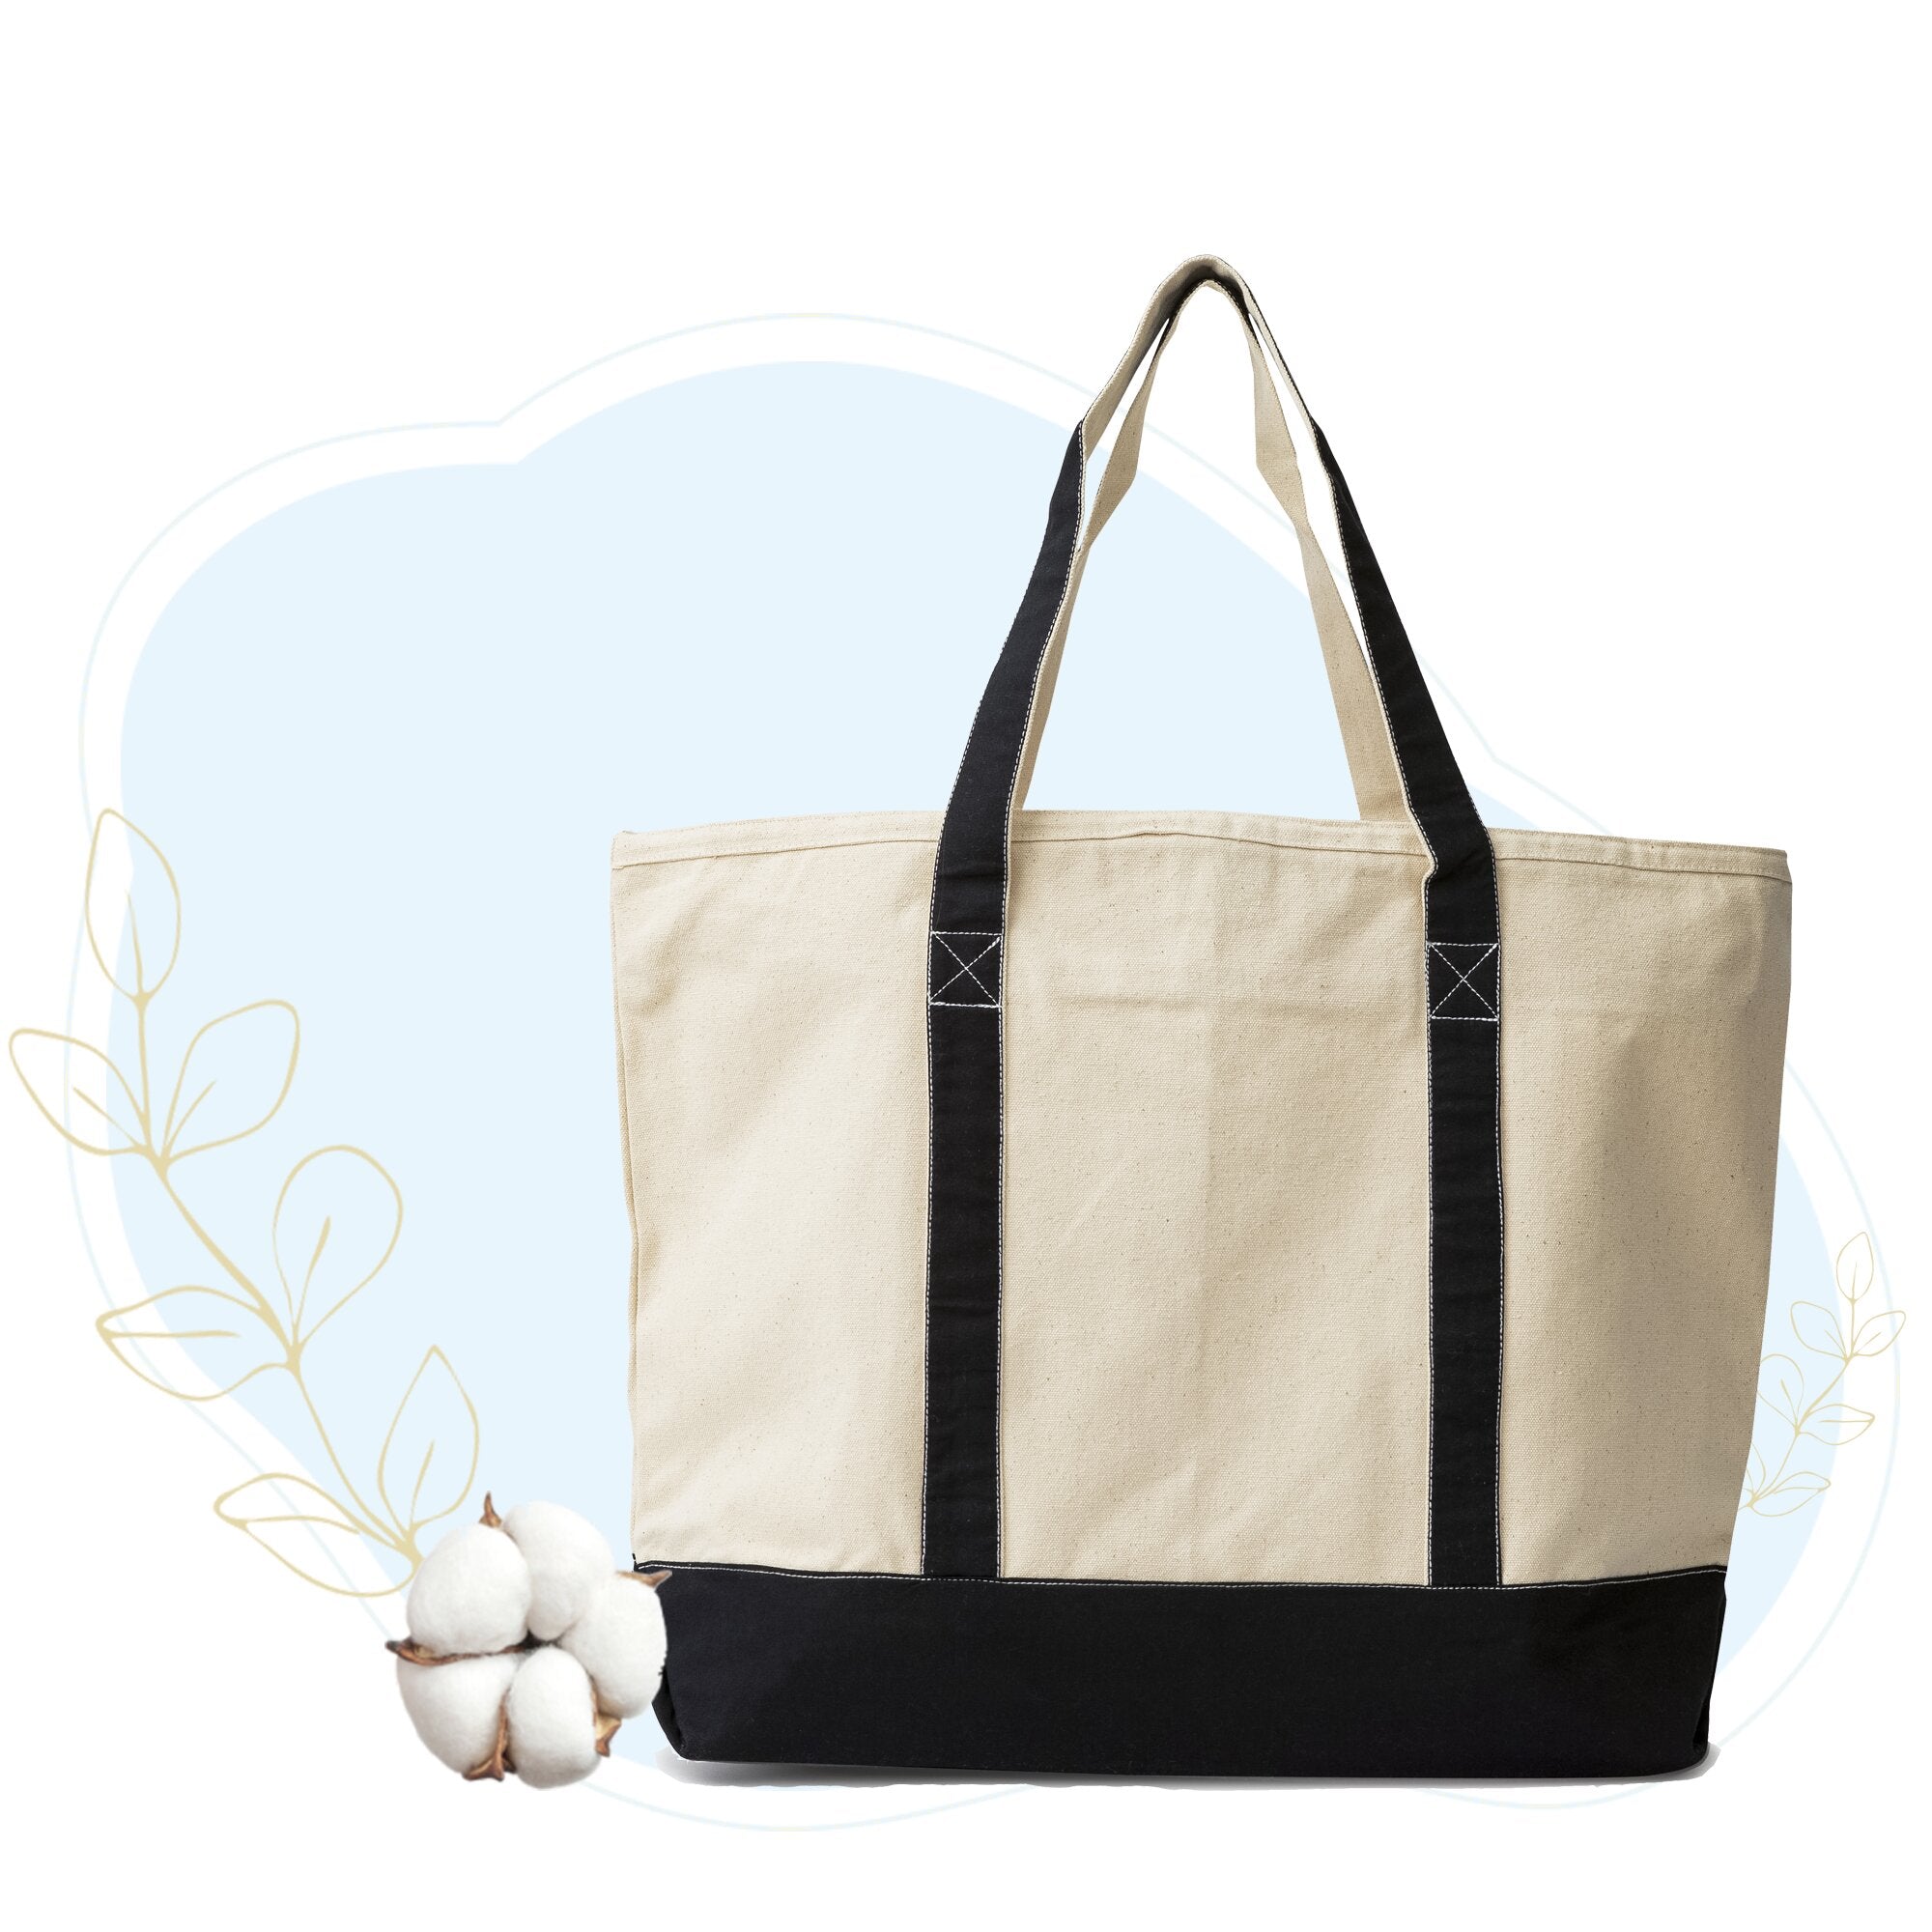 Kinematics Excrete Bore Extra Large Canvas Tote Bag with Handle and Zipper Top